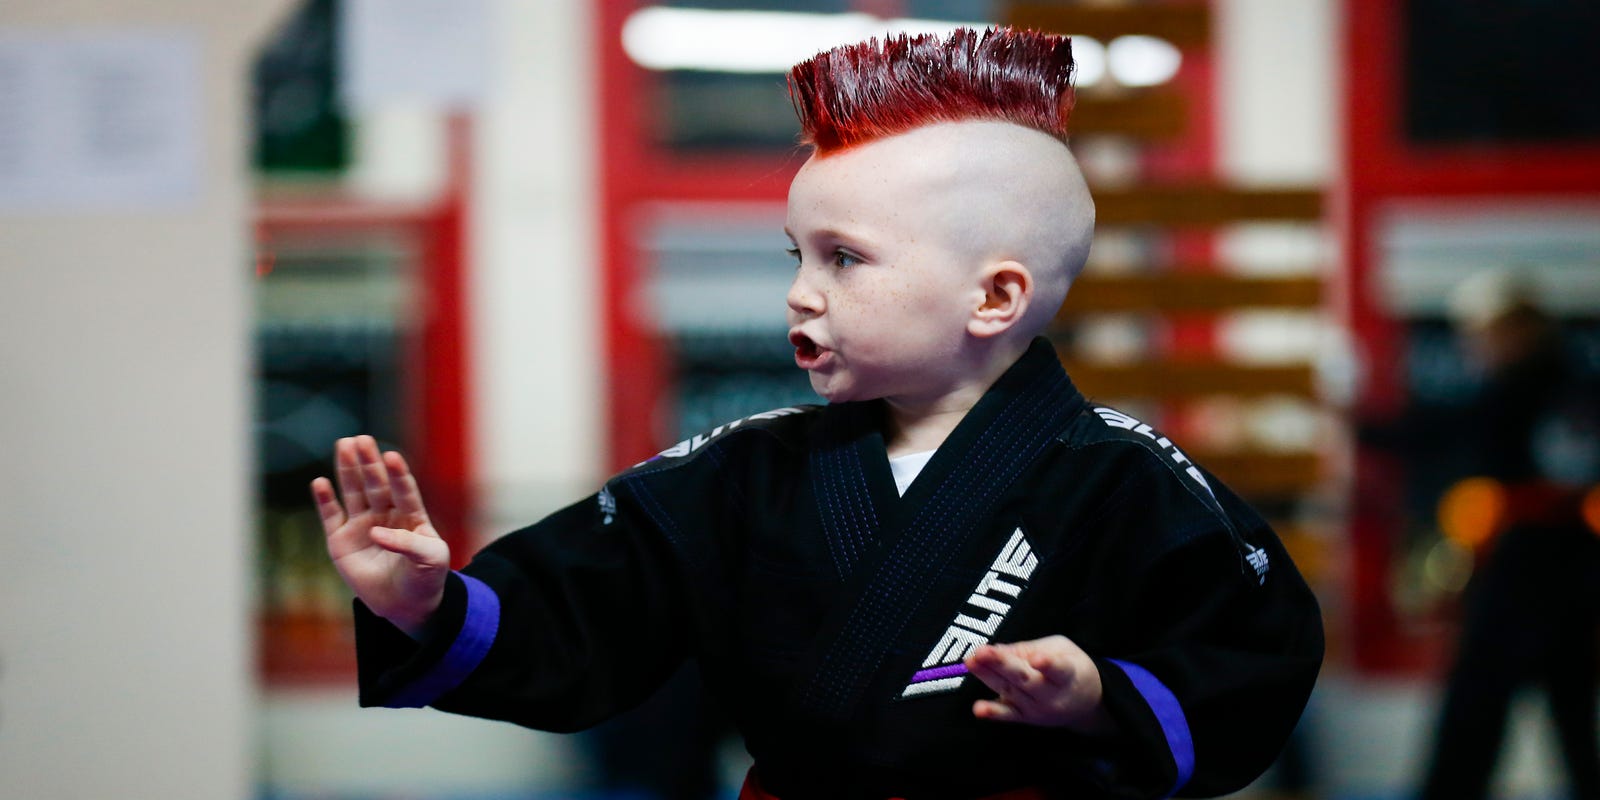 6-year-old taekwondo kid competes, prays for girl he's never met